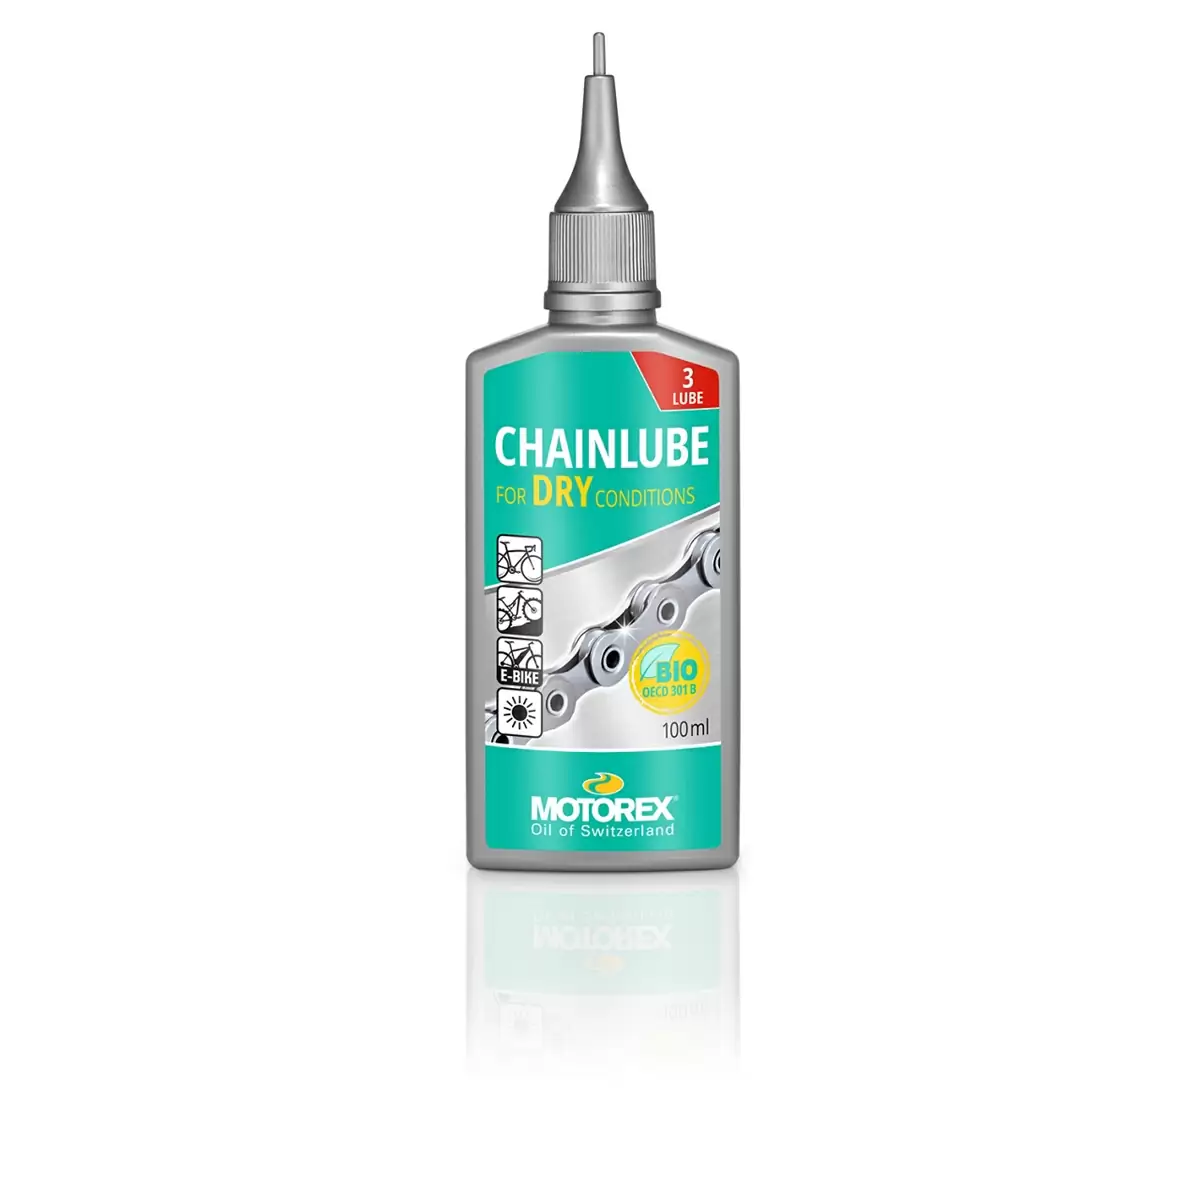 Chainlube Dry Lubricant Dry Conditions 100ml - image